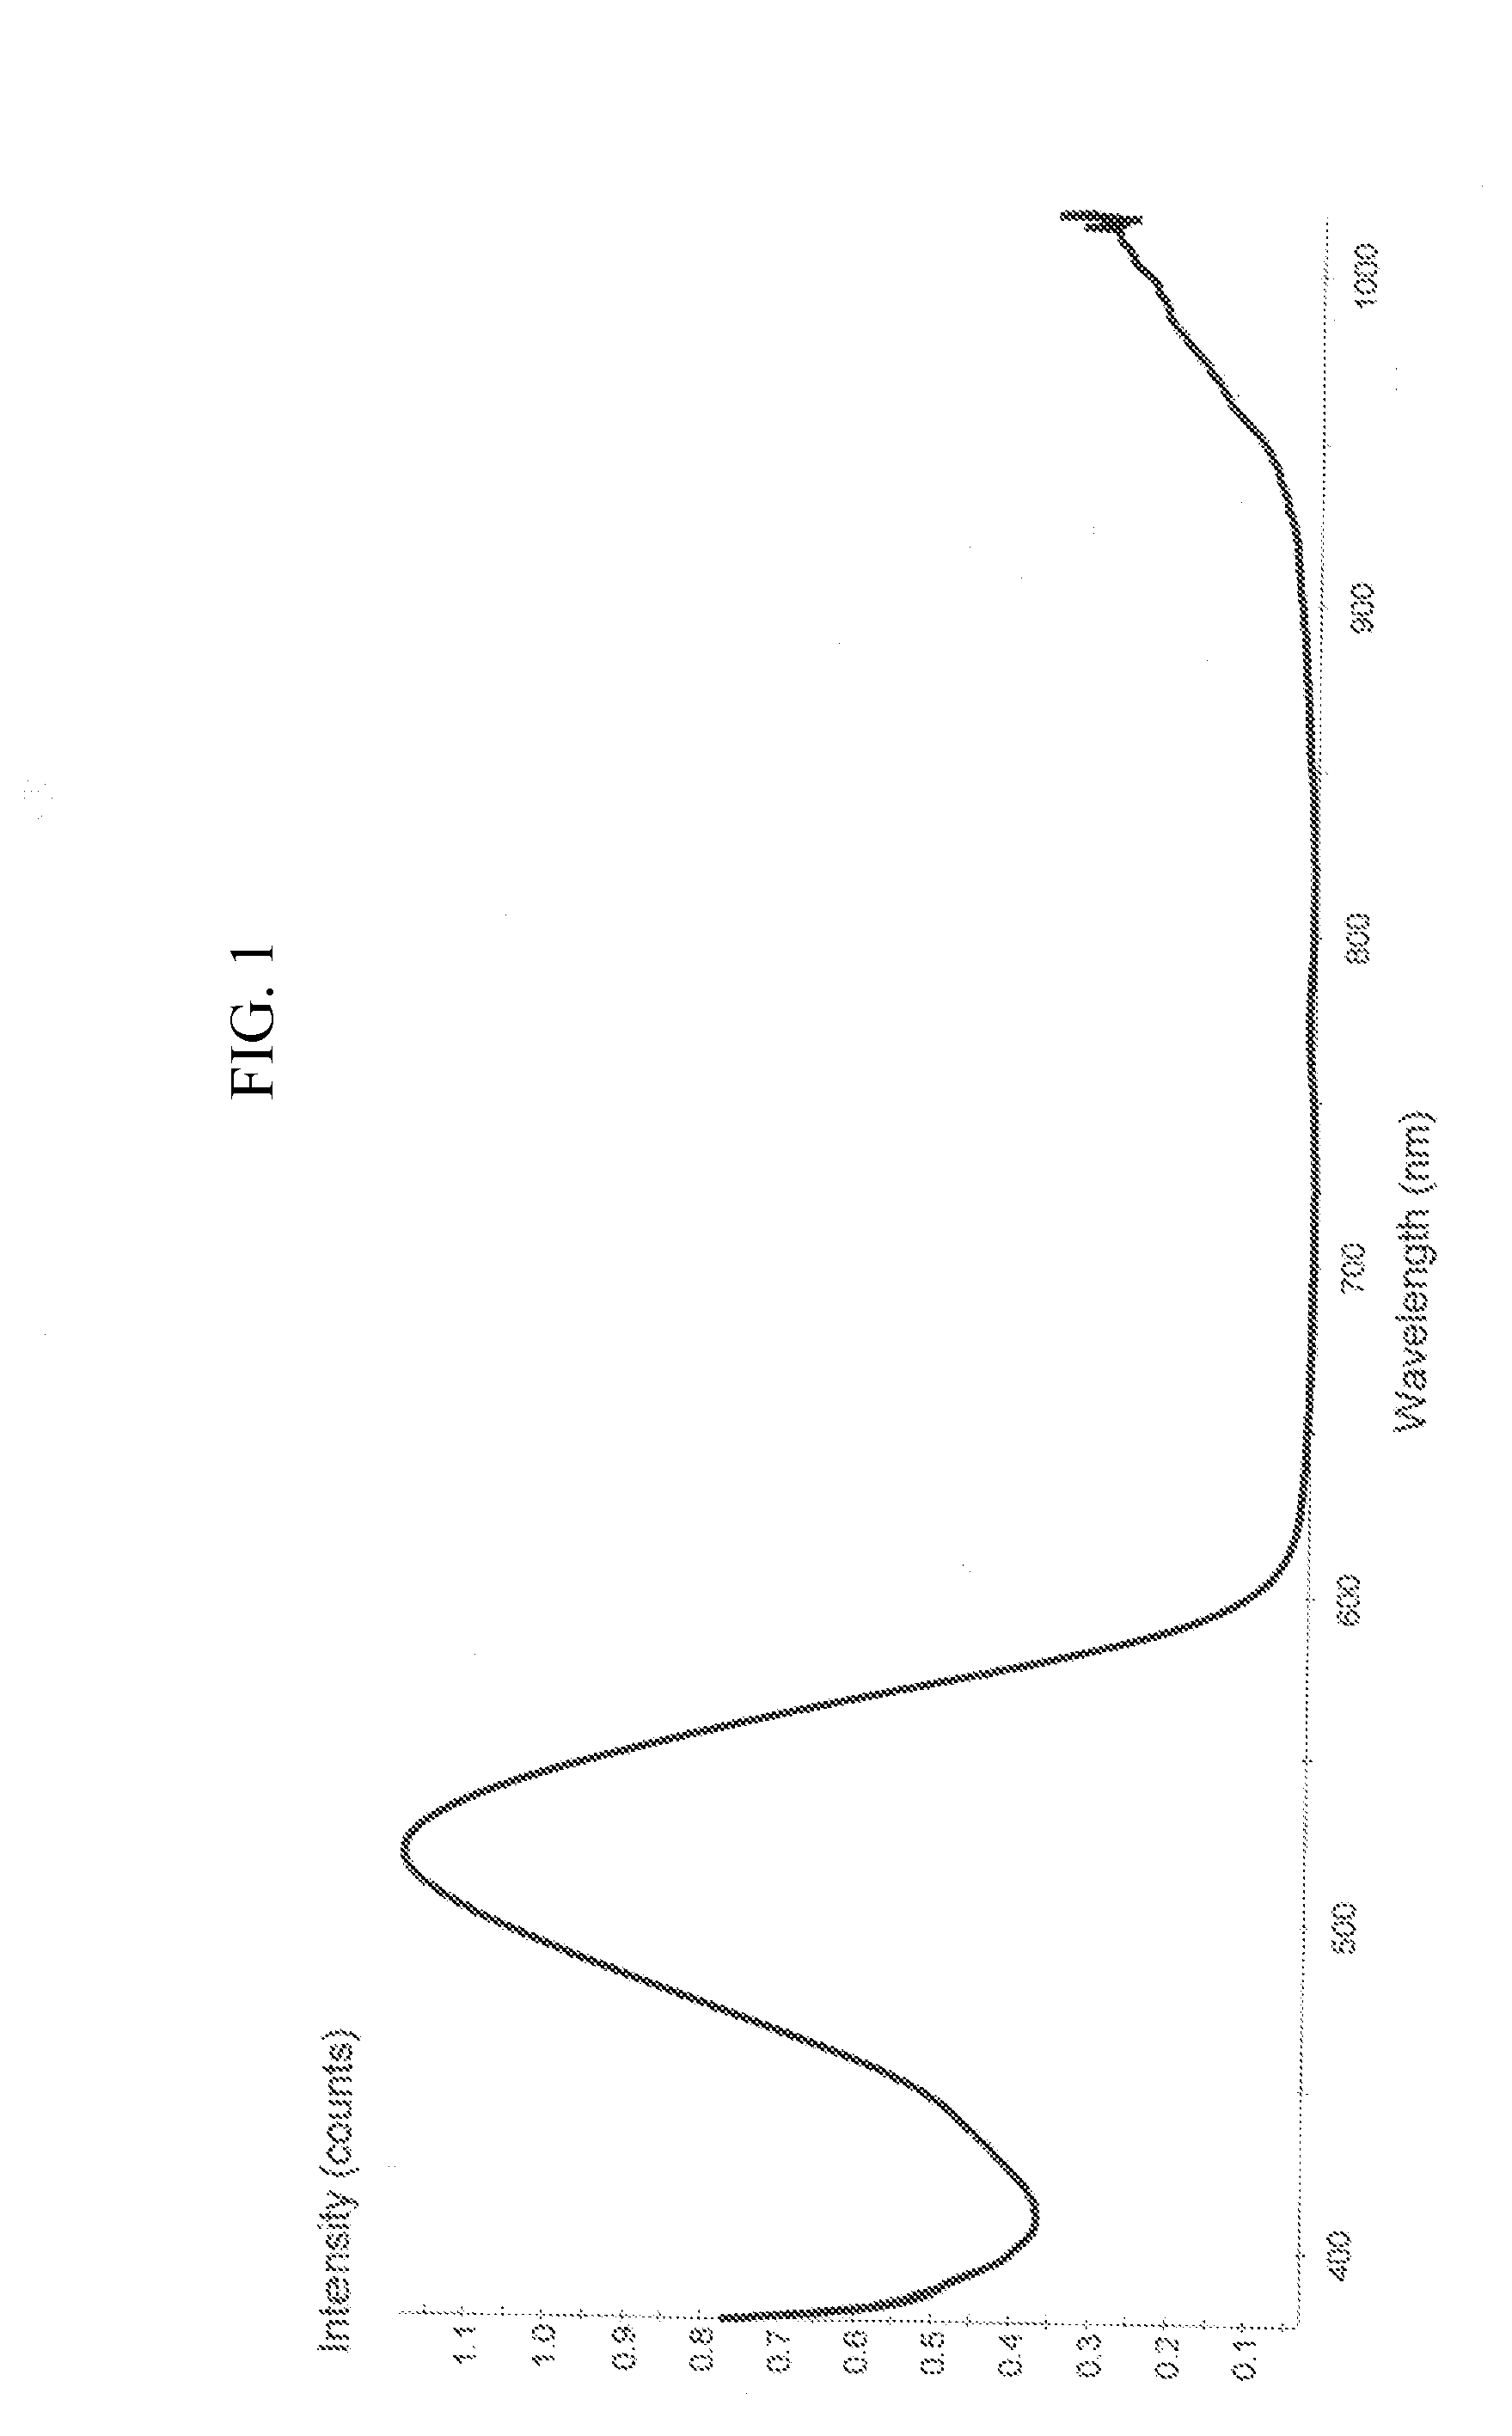 Method for Treating Residual Caries